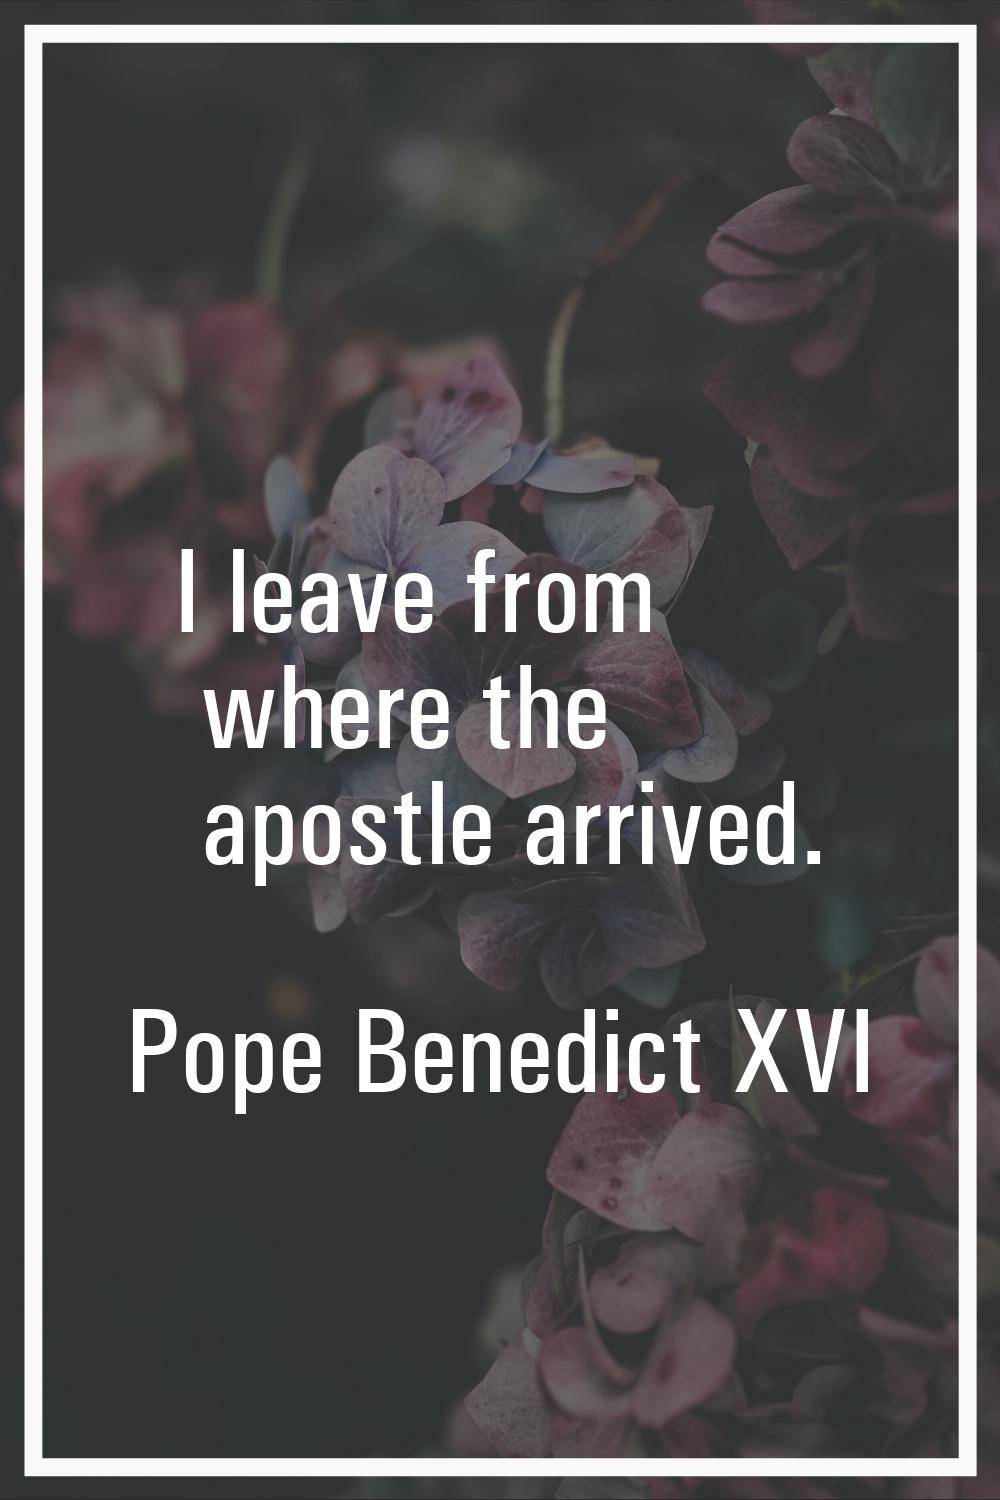 I leave from where the apostle arrived.